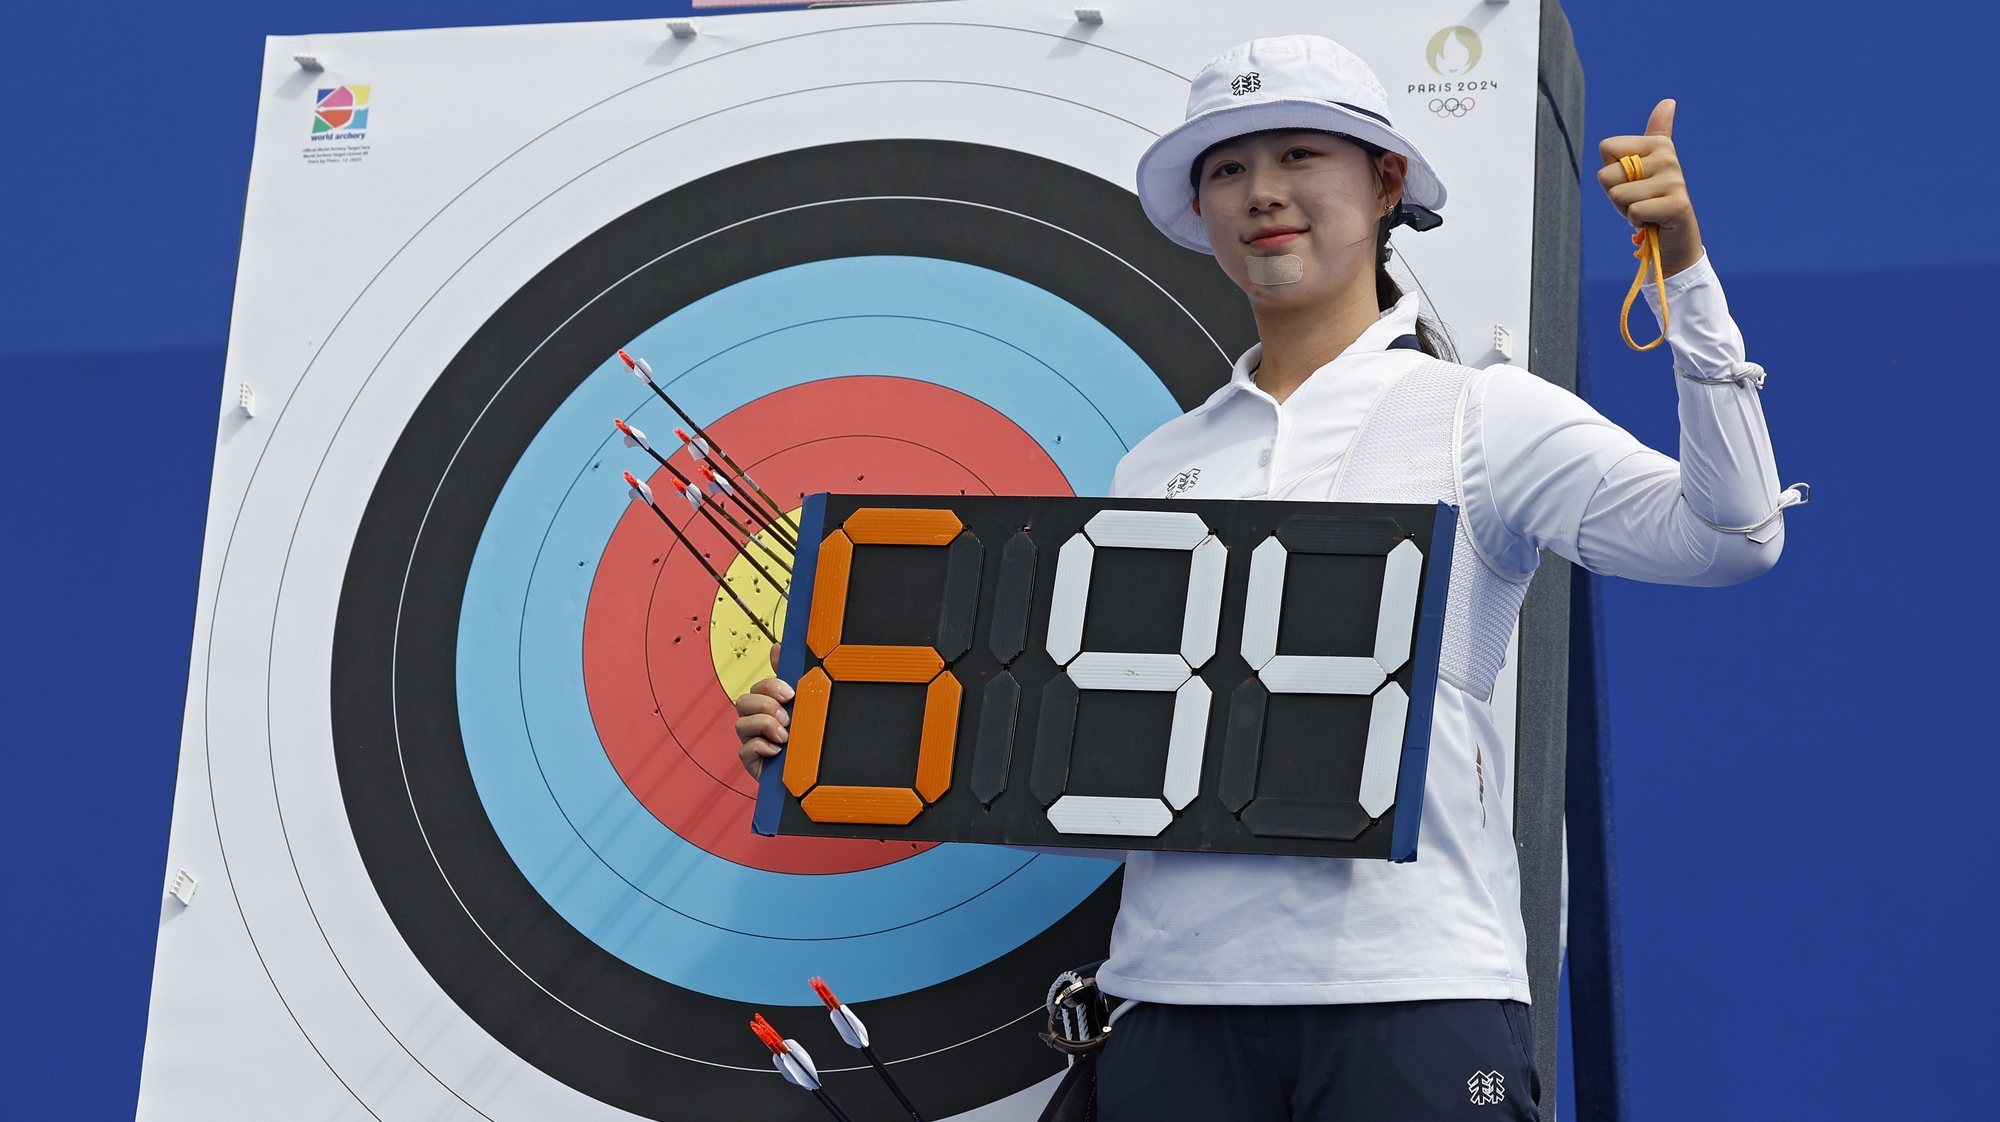 epa11495422 Lim Sihyeon of South Korea poses after establishing a new World Record in the Women Individual Ranking Round of the Archery competitions in the Paris 2024 Olympic Games, at the Invalides in Paris, France, 25 July 2024.  EPA/CAROLINE BREHMAN